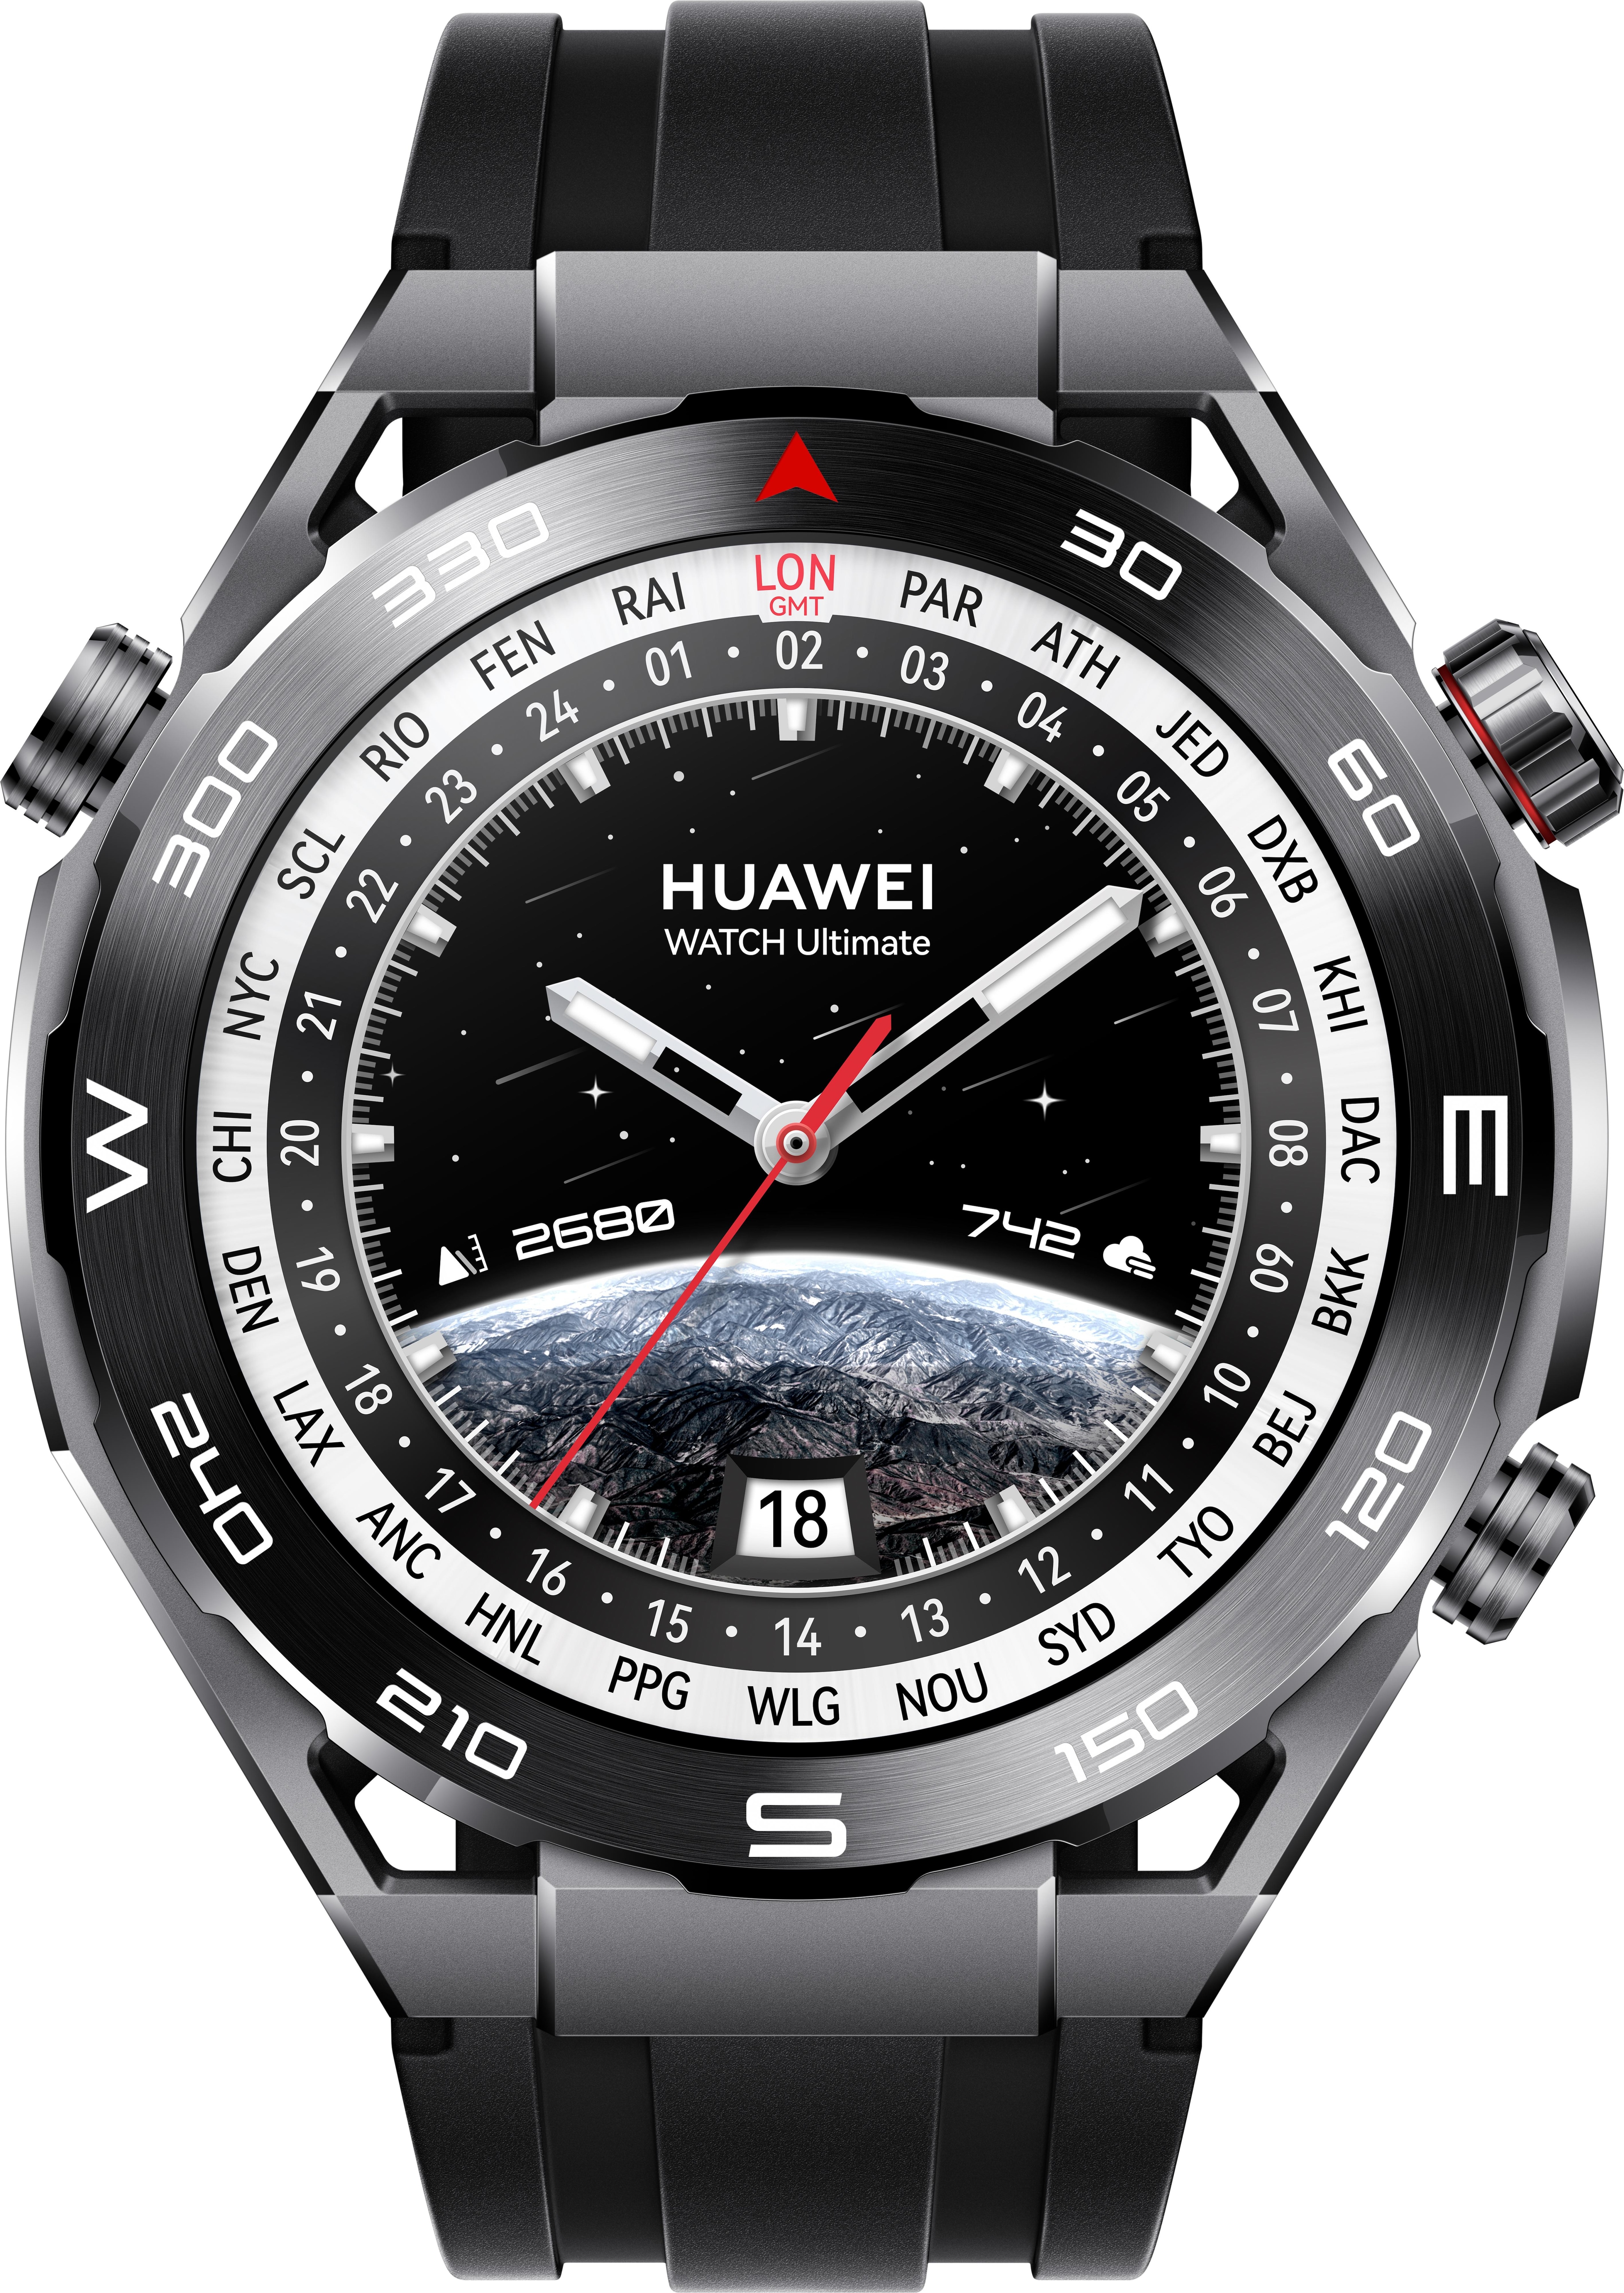 Huawei Watch Ultimate Expedition Black (48.50 mm, Keramik, Metall, One Size), Sportuhr + Smartwatch